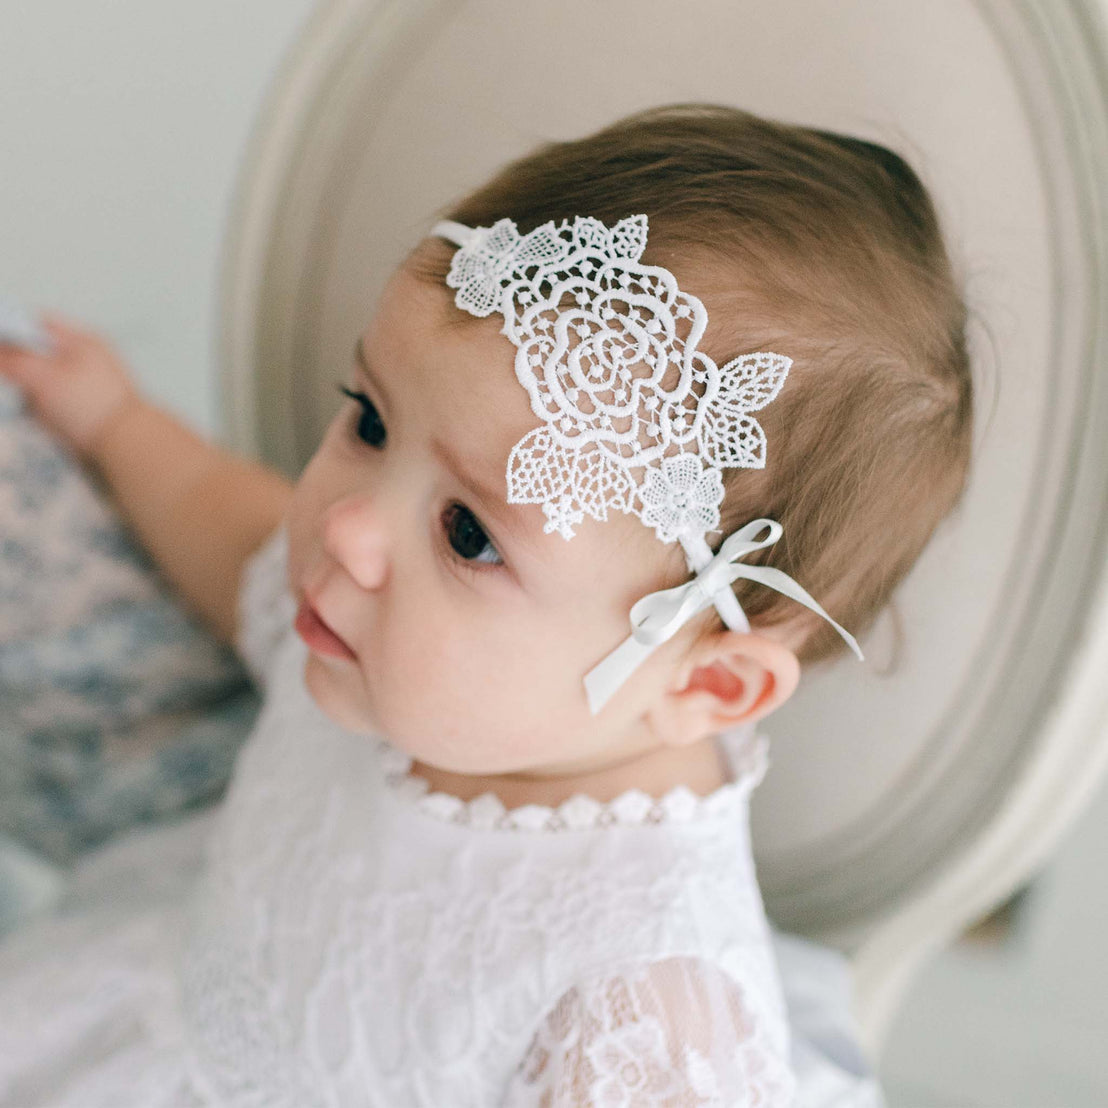 A baby wearing a white lace Olivia headband sits looking to the side, with a gentle expression, against a soft neutral background. This heirloom-quality outfit makes an ideal baby gift.